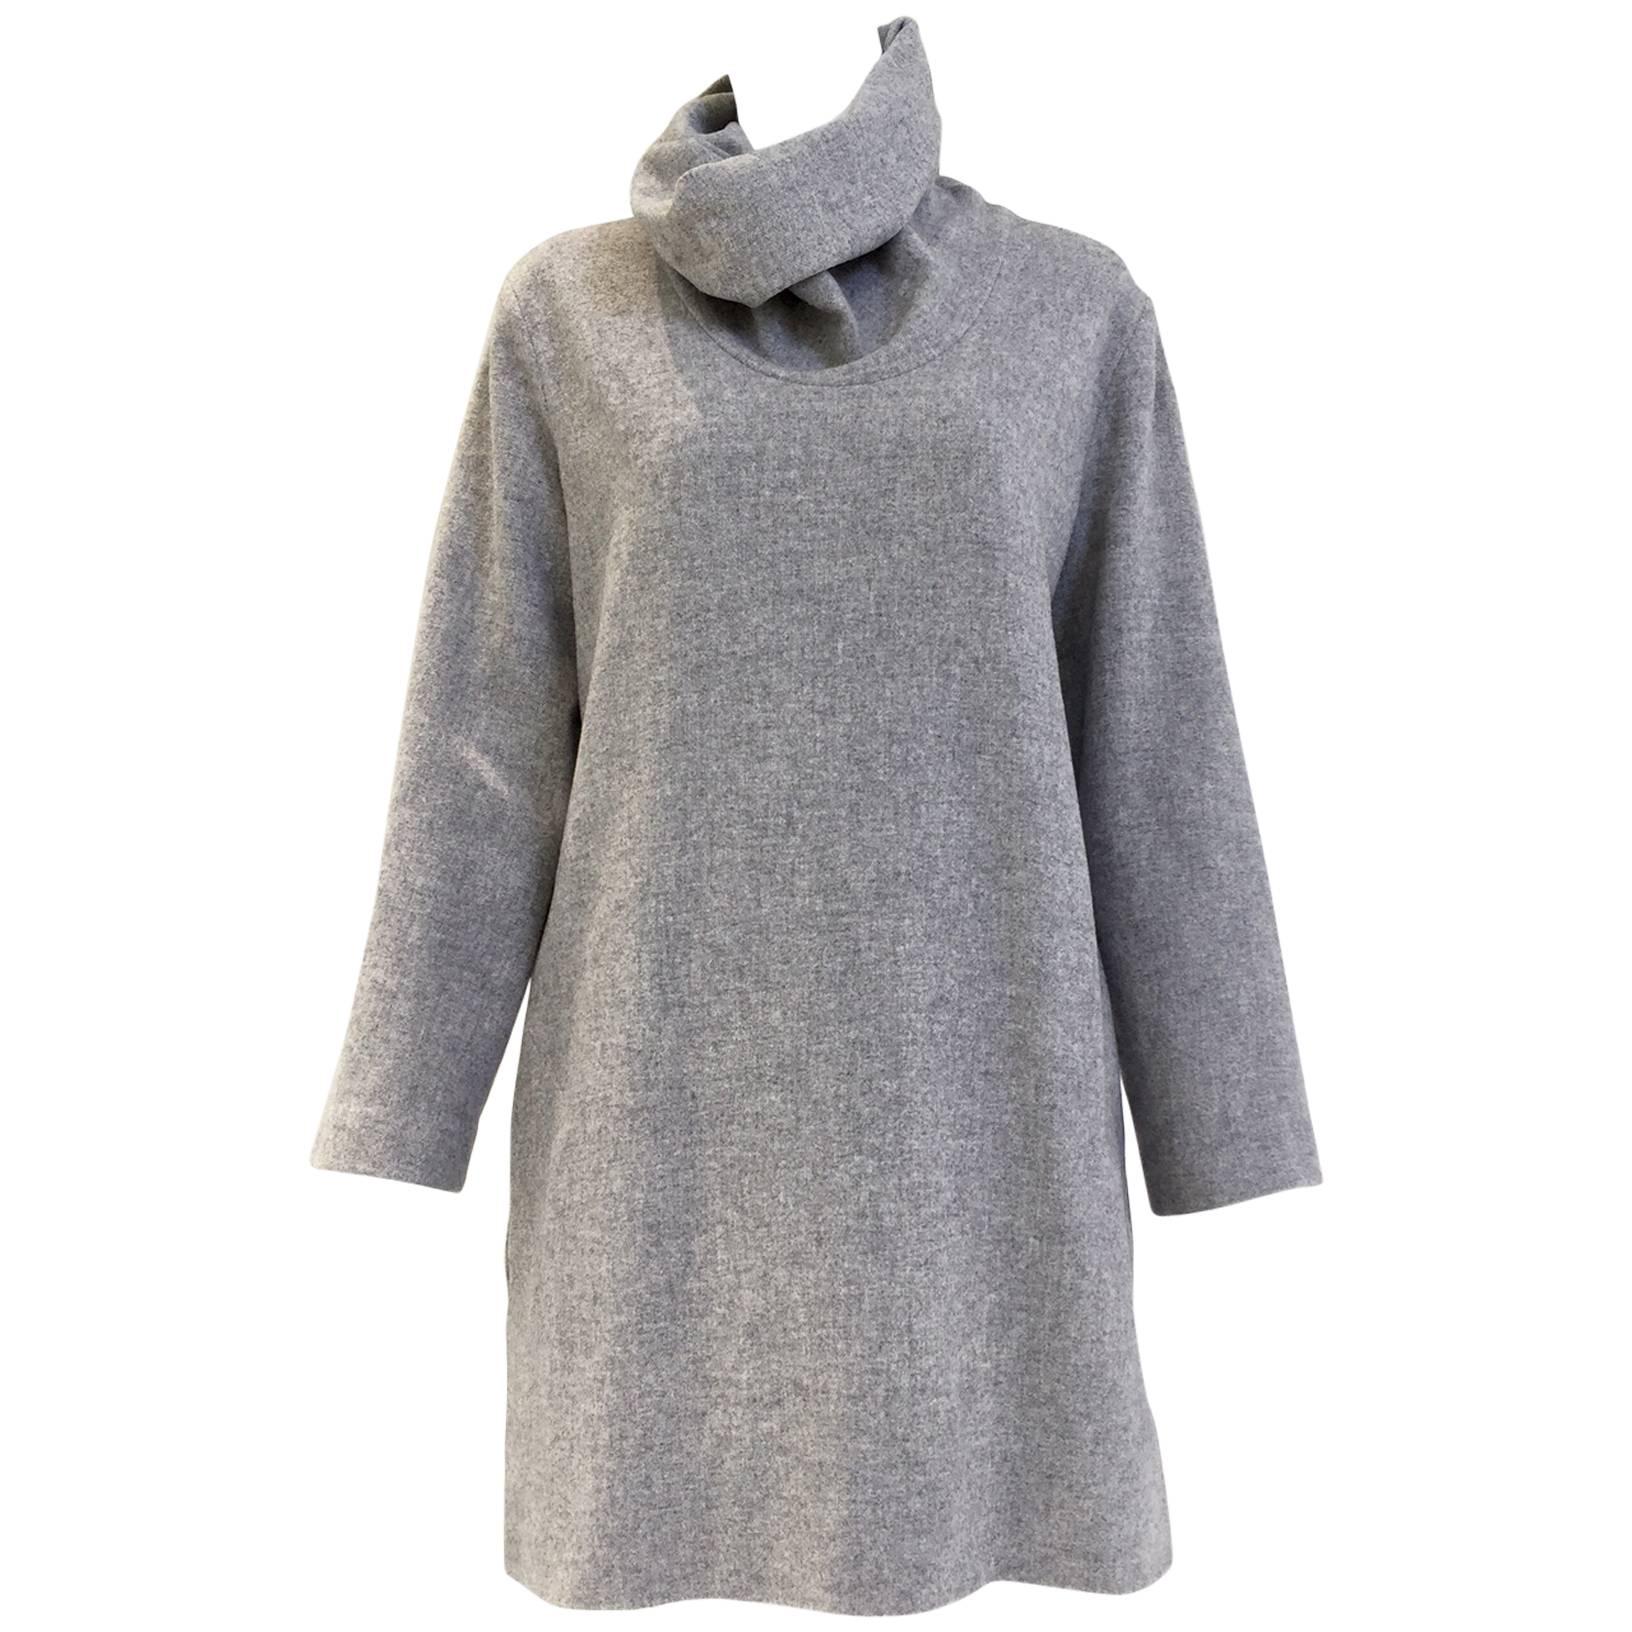 90s Jean Paul Gaultier grey wool and cashmere dress